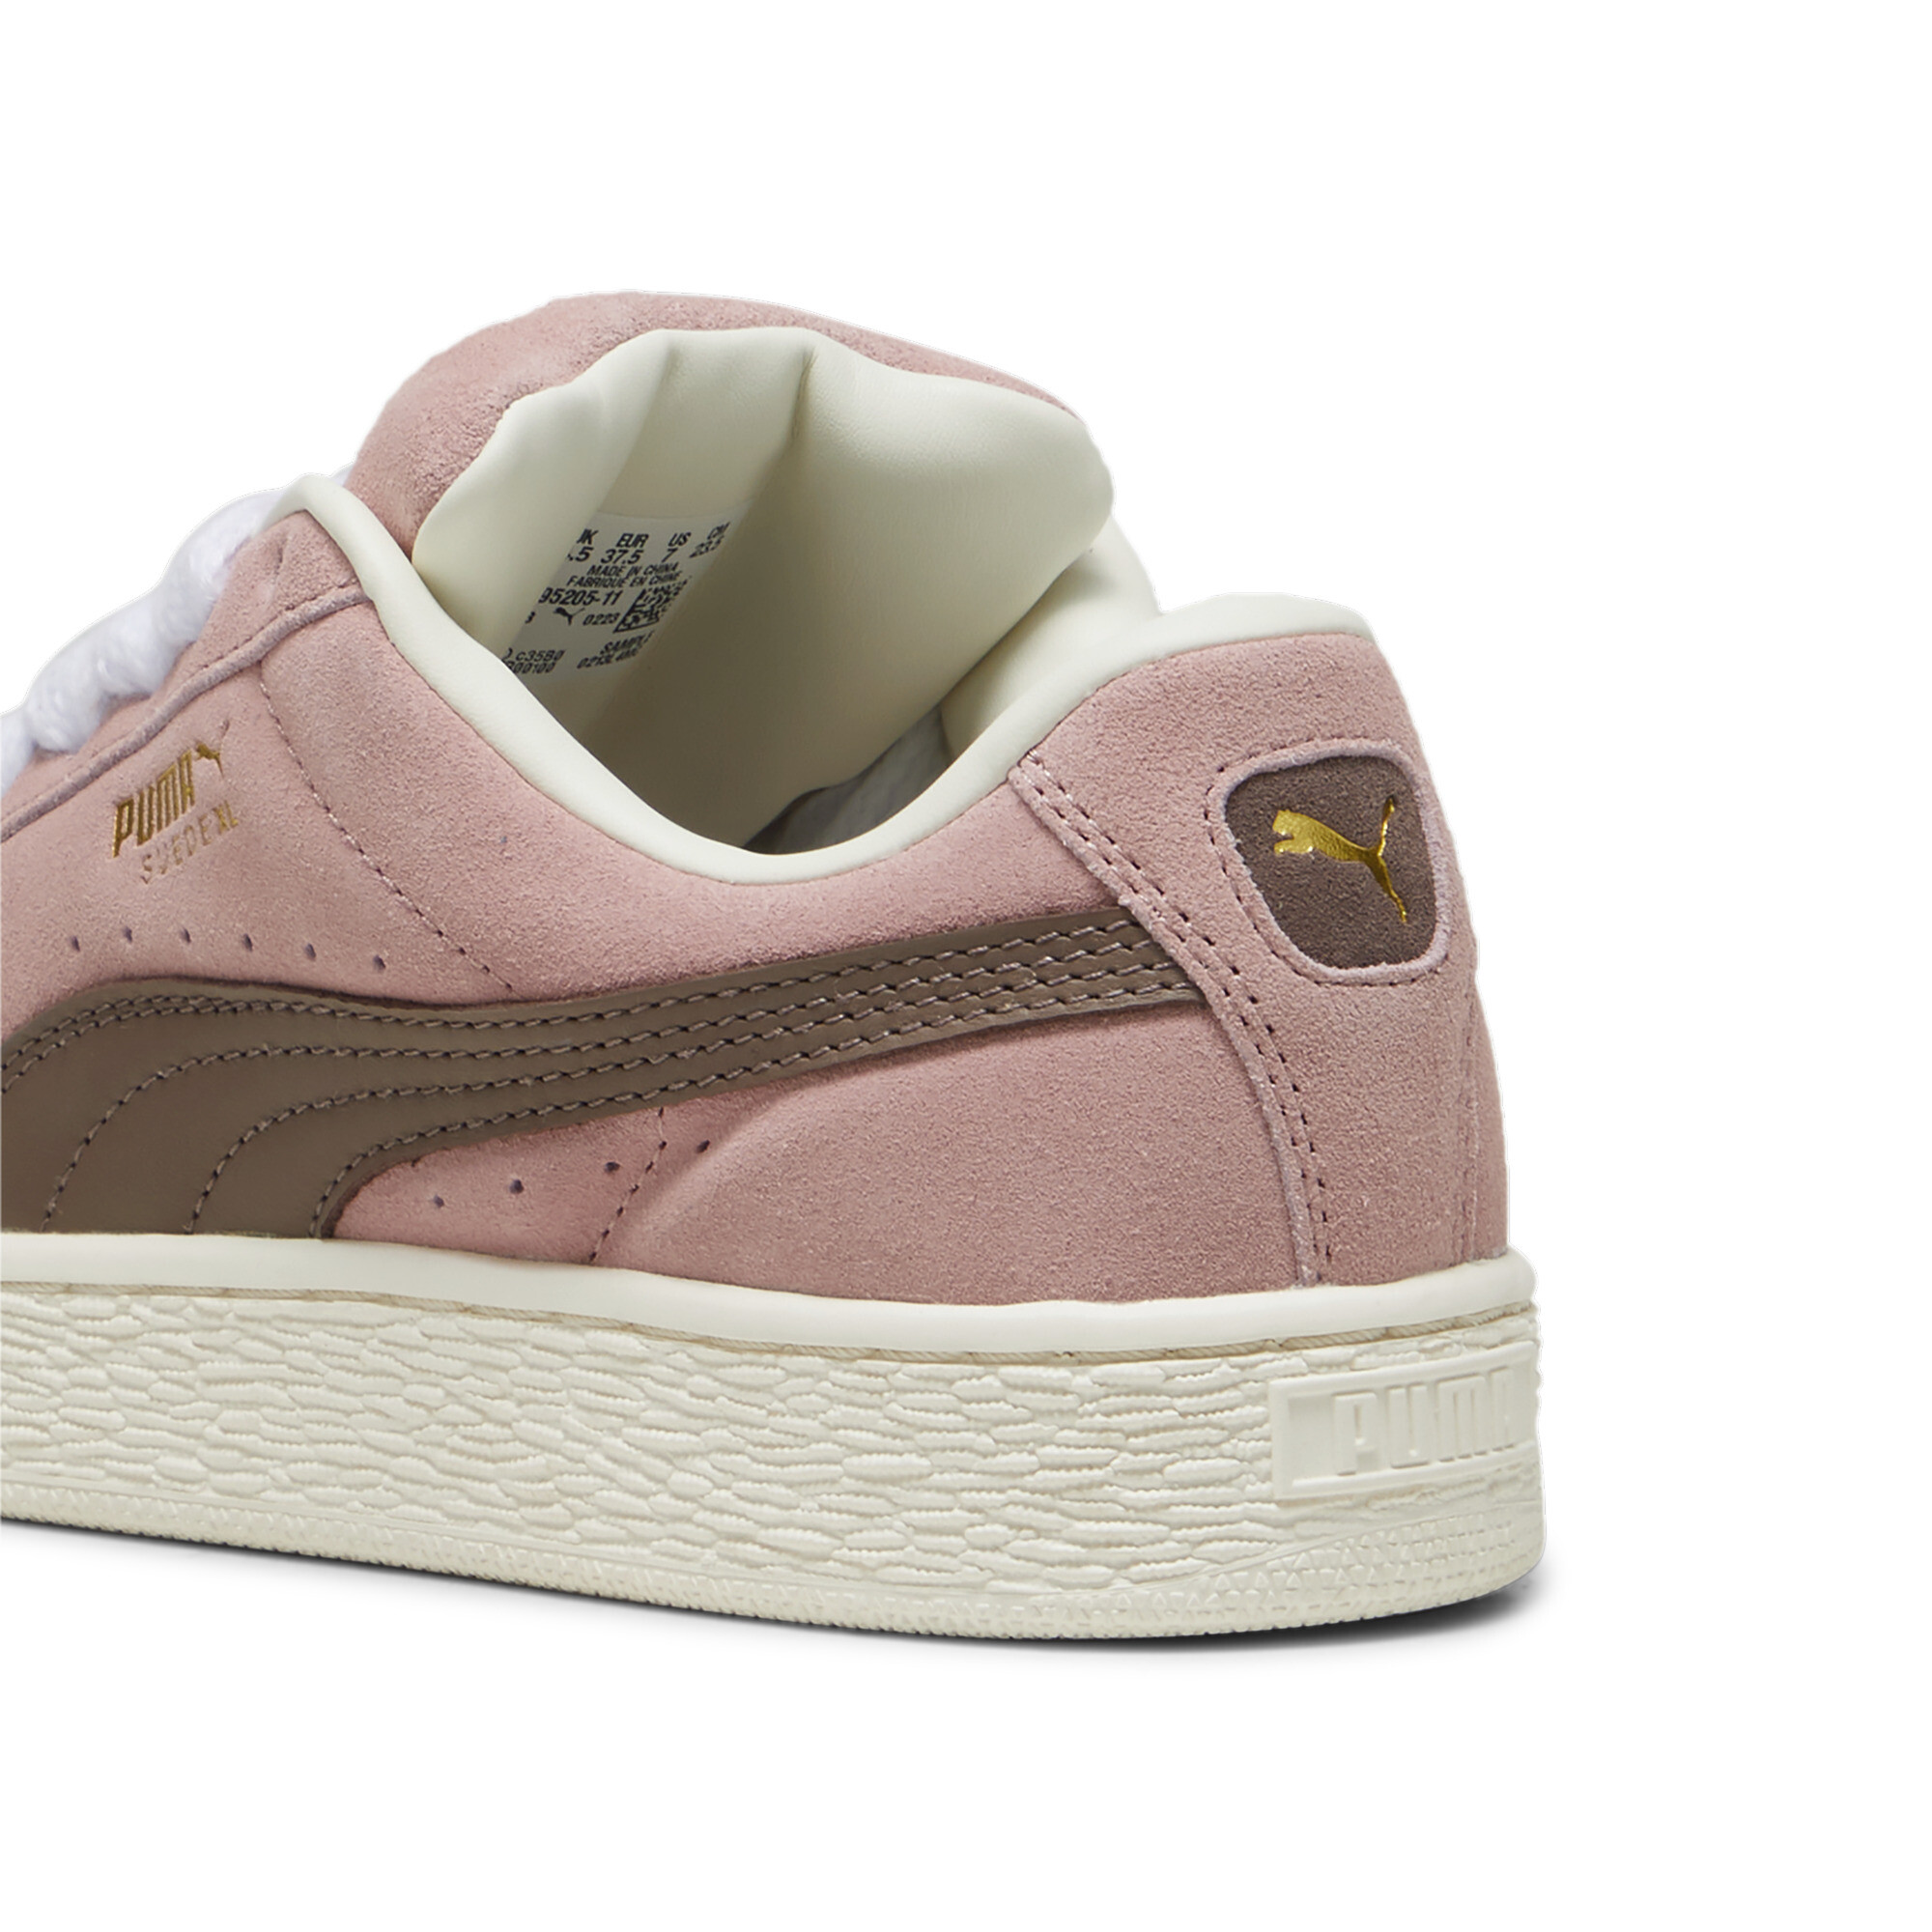 Puma Suede XL Sneakers Unisex, Pink, Size 41, Shoes